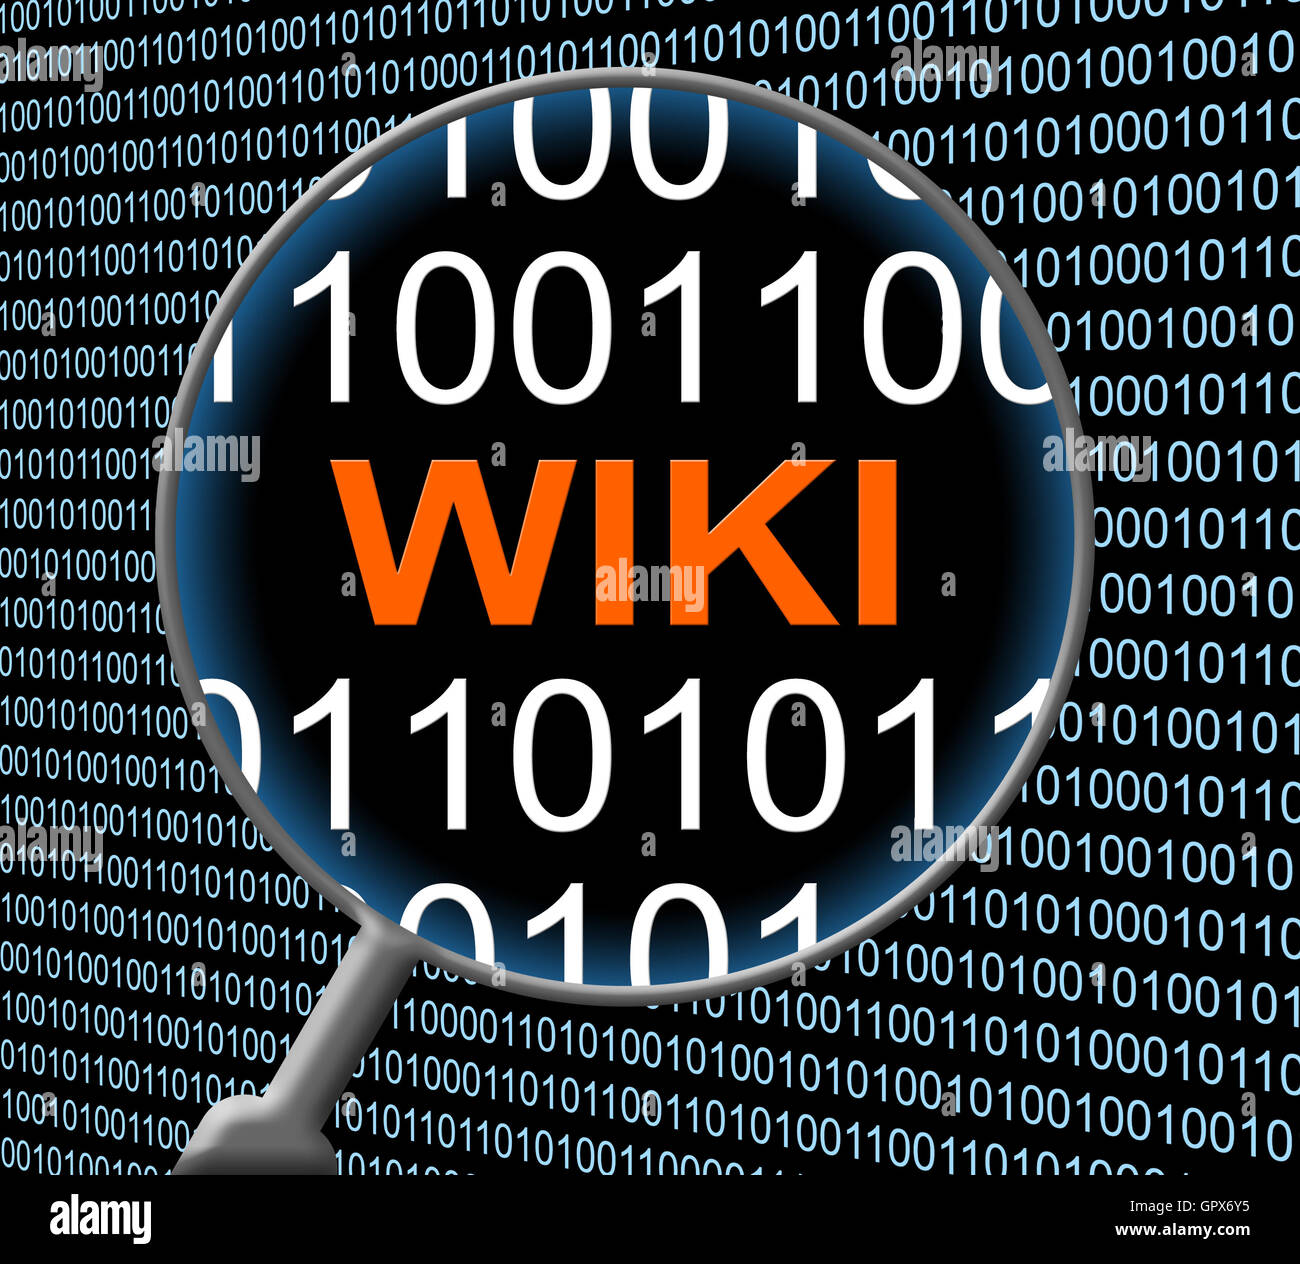 Wiki Online Meaning Web Site And Computing Stock Photo